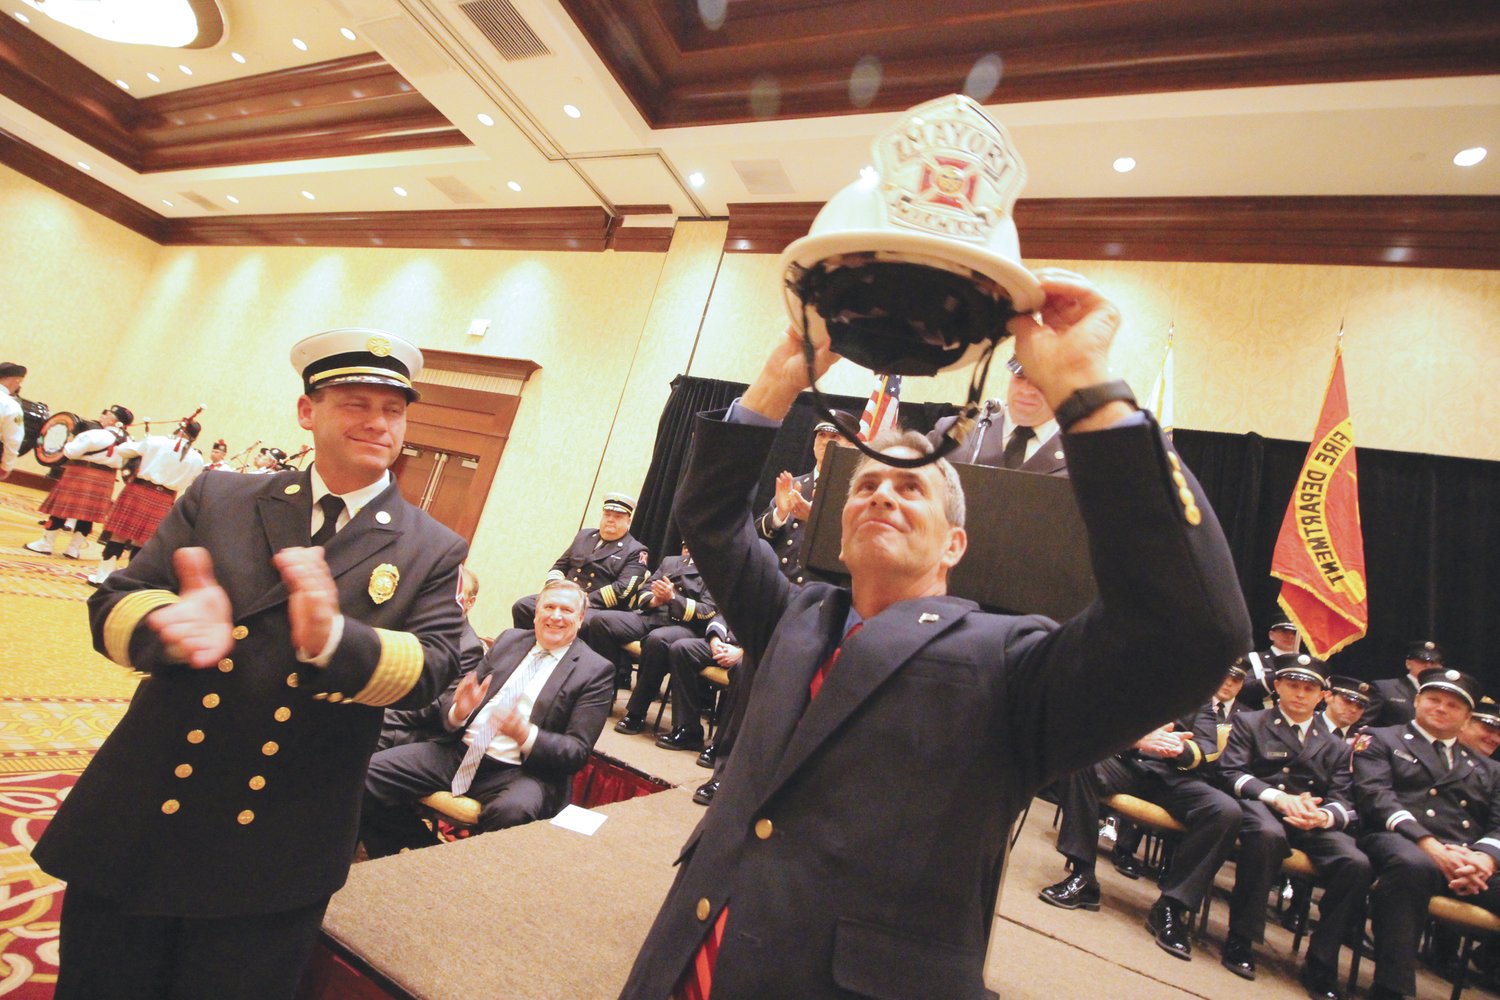 NOW THAT’S A HAT: Mayor Frank Picozzi takes a close look at the helmet he was presented by Lt. Michael Carreiro, president of Warwick Firefighters Local 2748